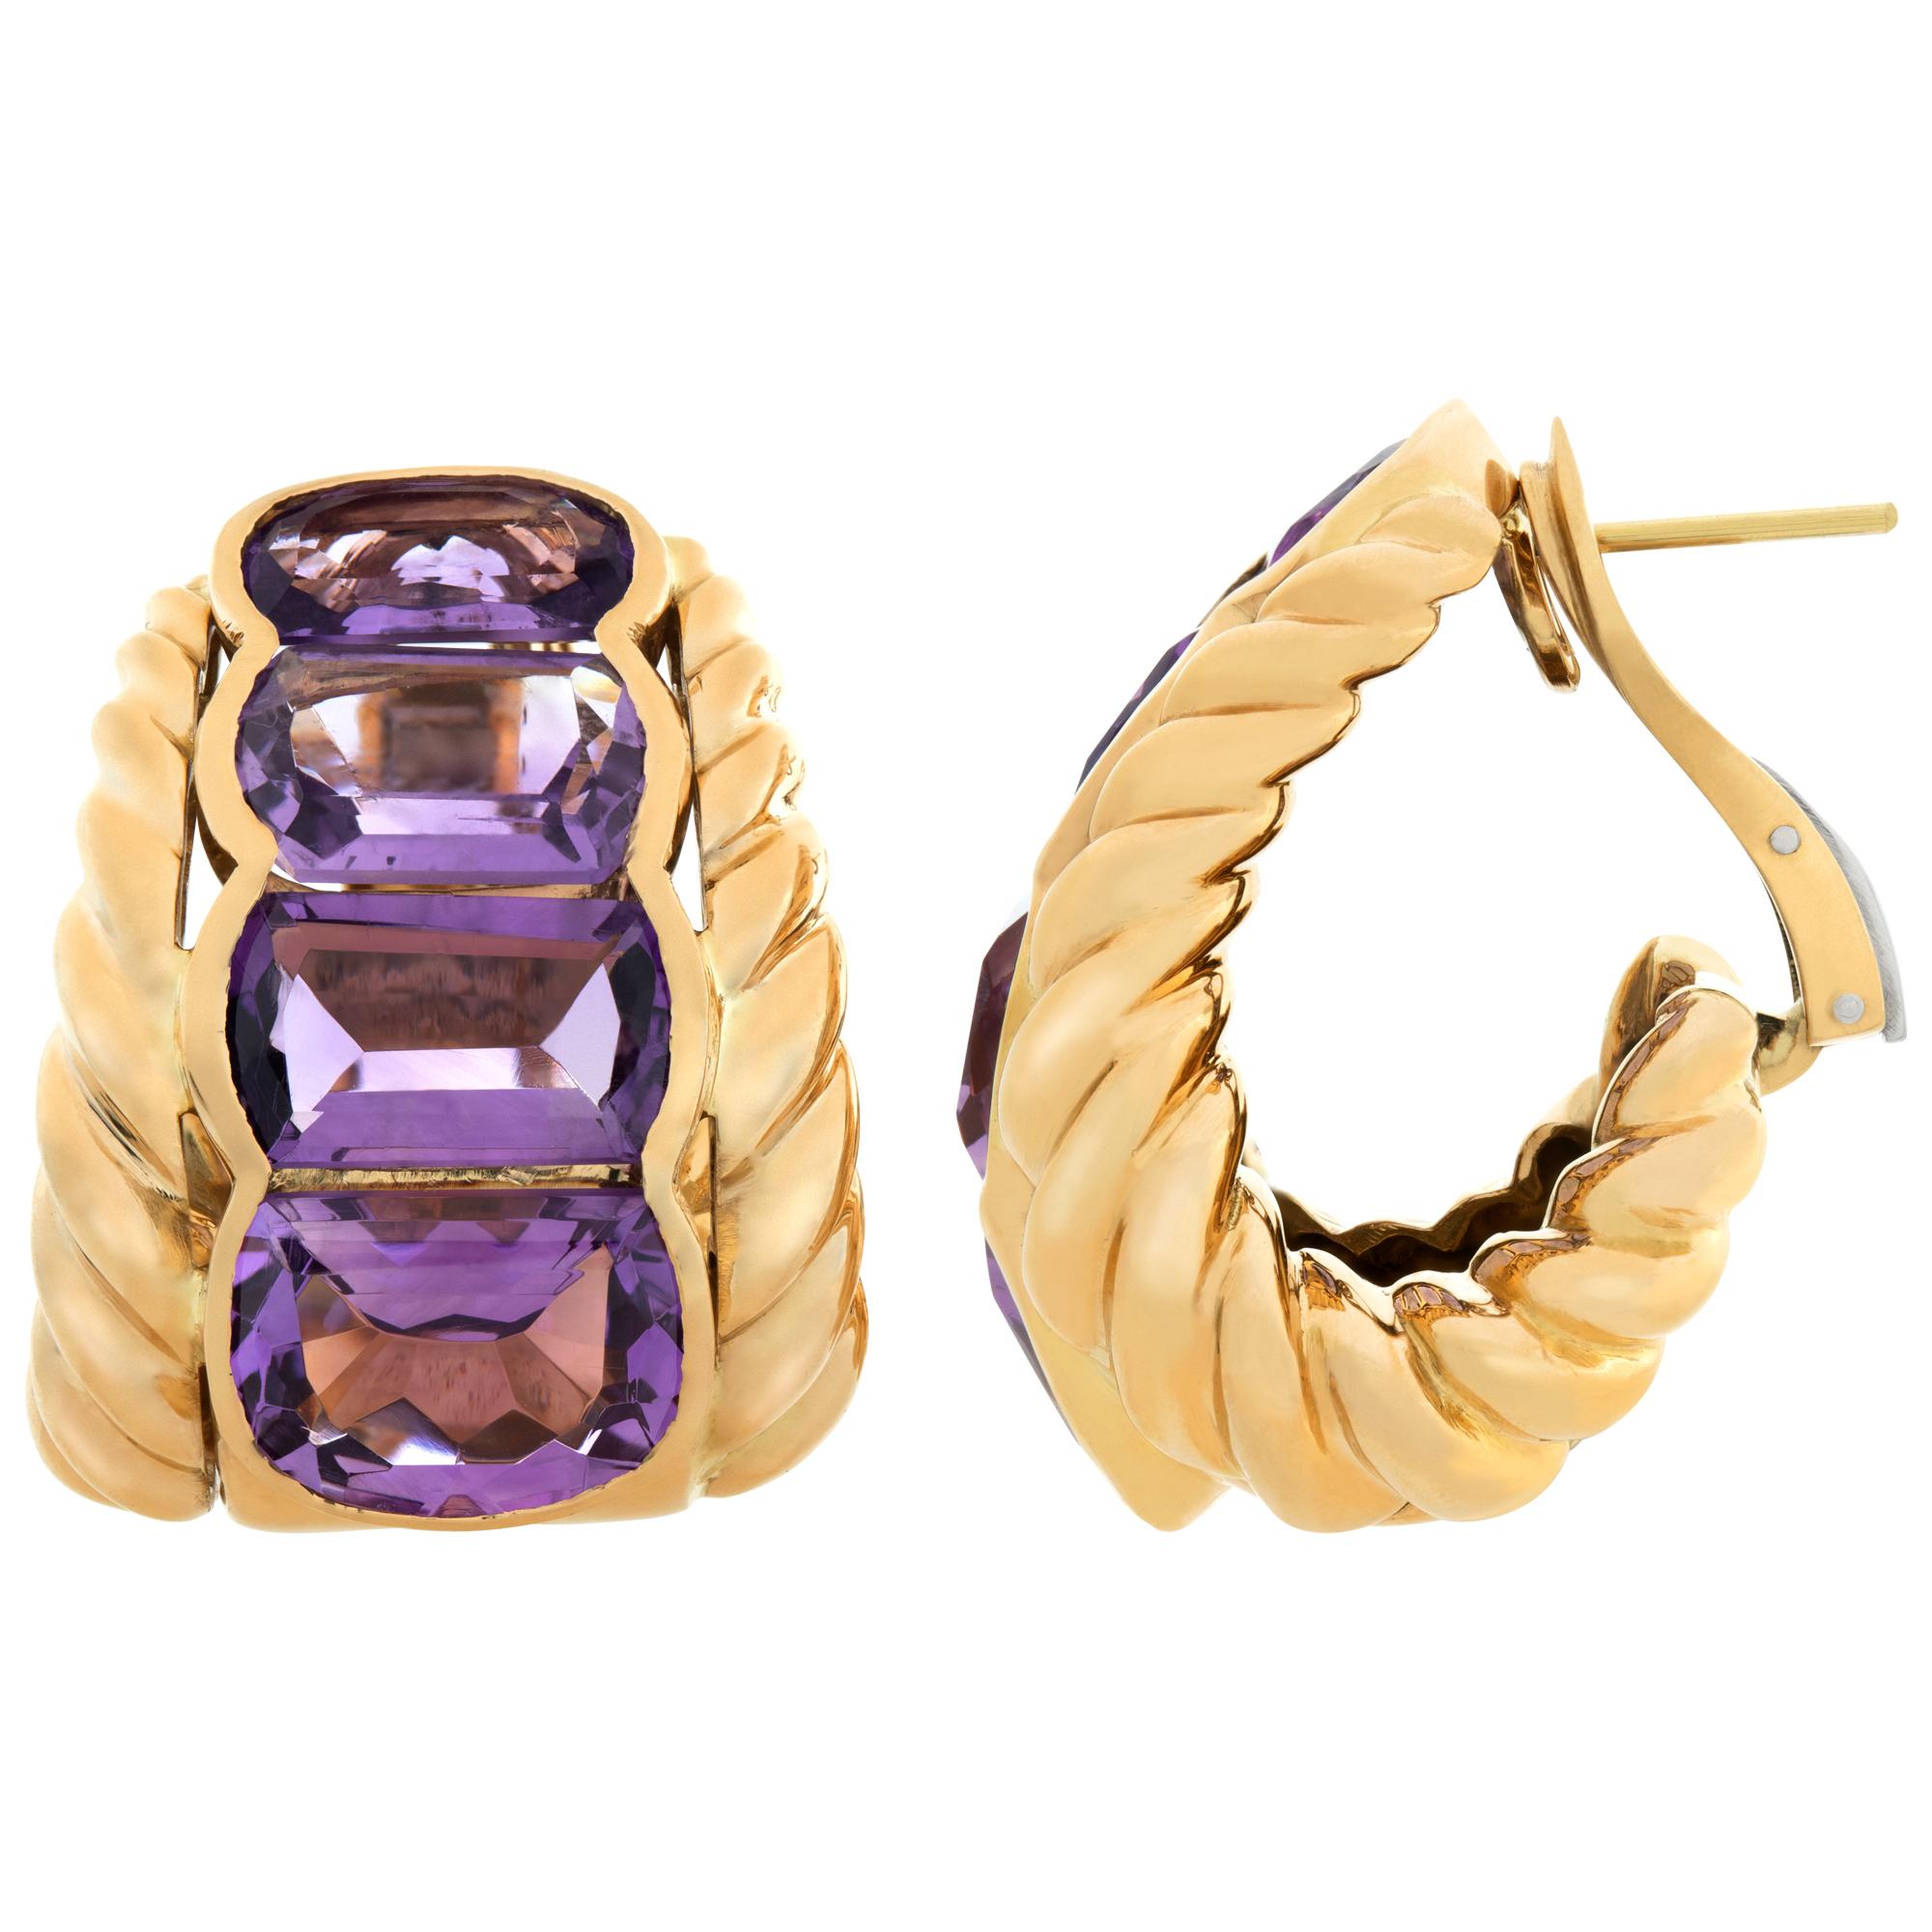 Half wide hoops with over 28 carats graduating emerald cut Amethyst set in 18K yellow gold. Omega clip post. 40mm high x 25 mm wide.
